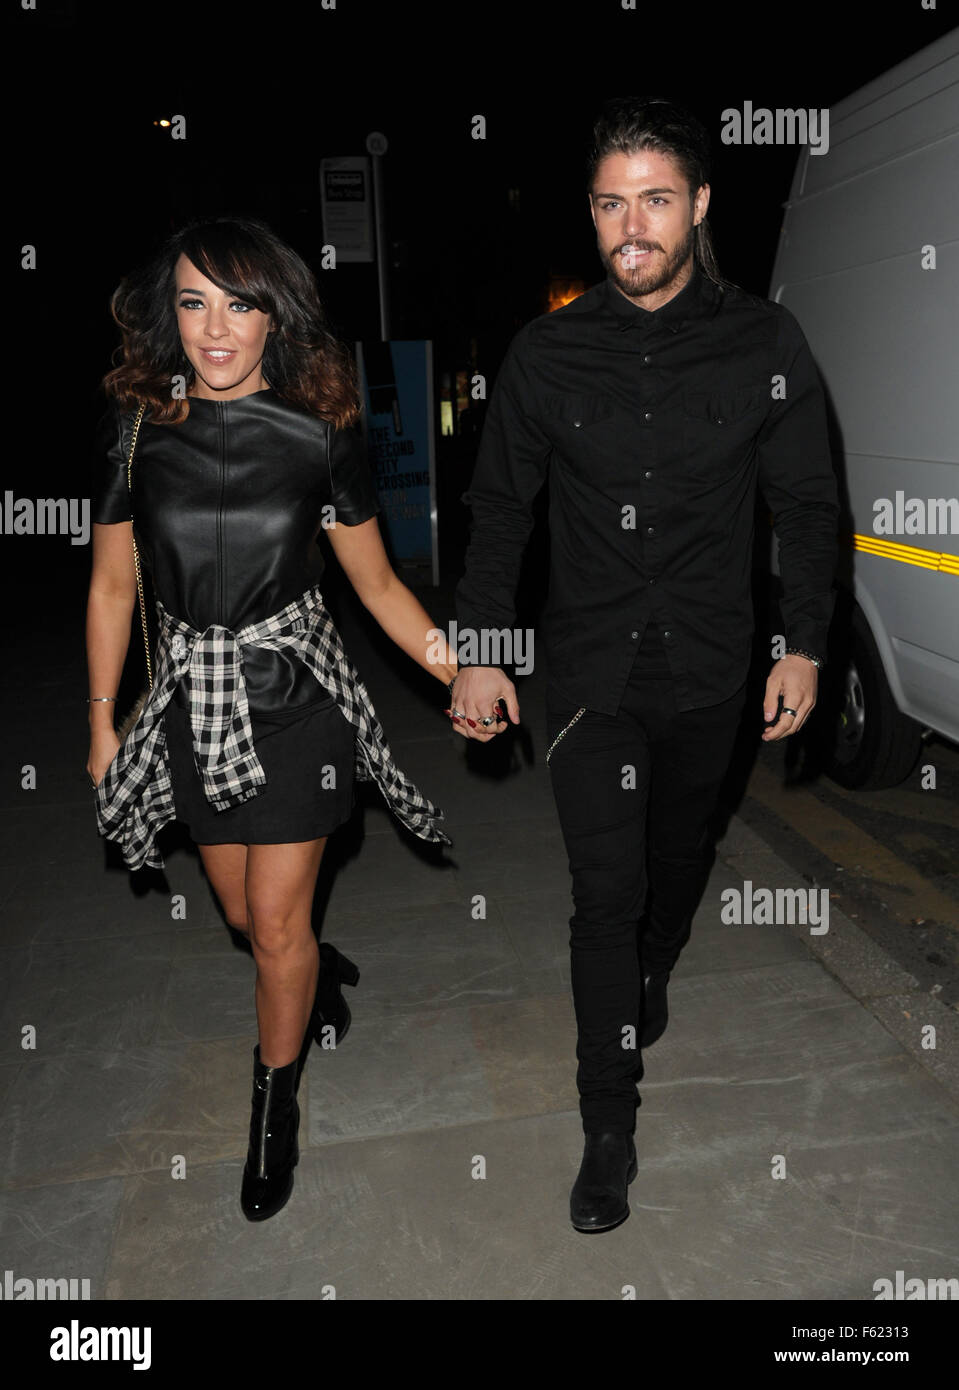 Celebs Attending The Belstaff Store Launch On King Street In Manchester  Featuring: Steph Davis, Sam Reece Where: Manchester, United Kingdom When:  01 Oct 2015 Stock Photo - Alamy